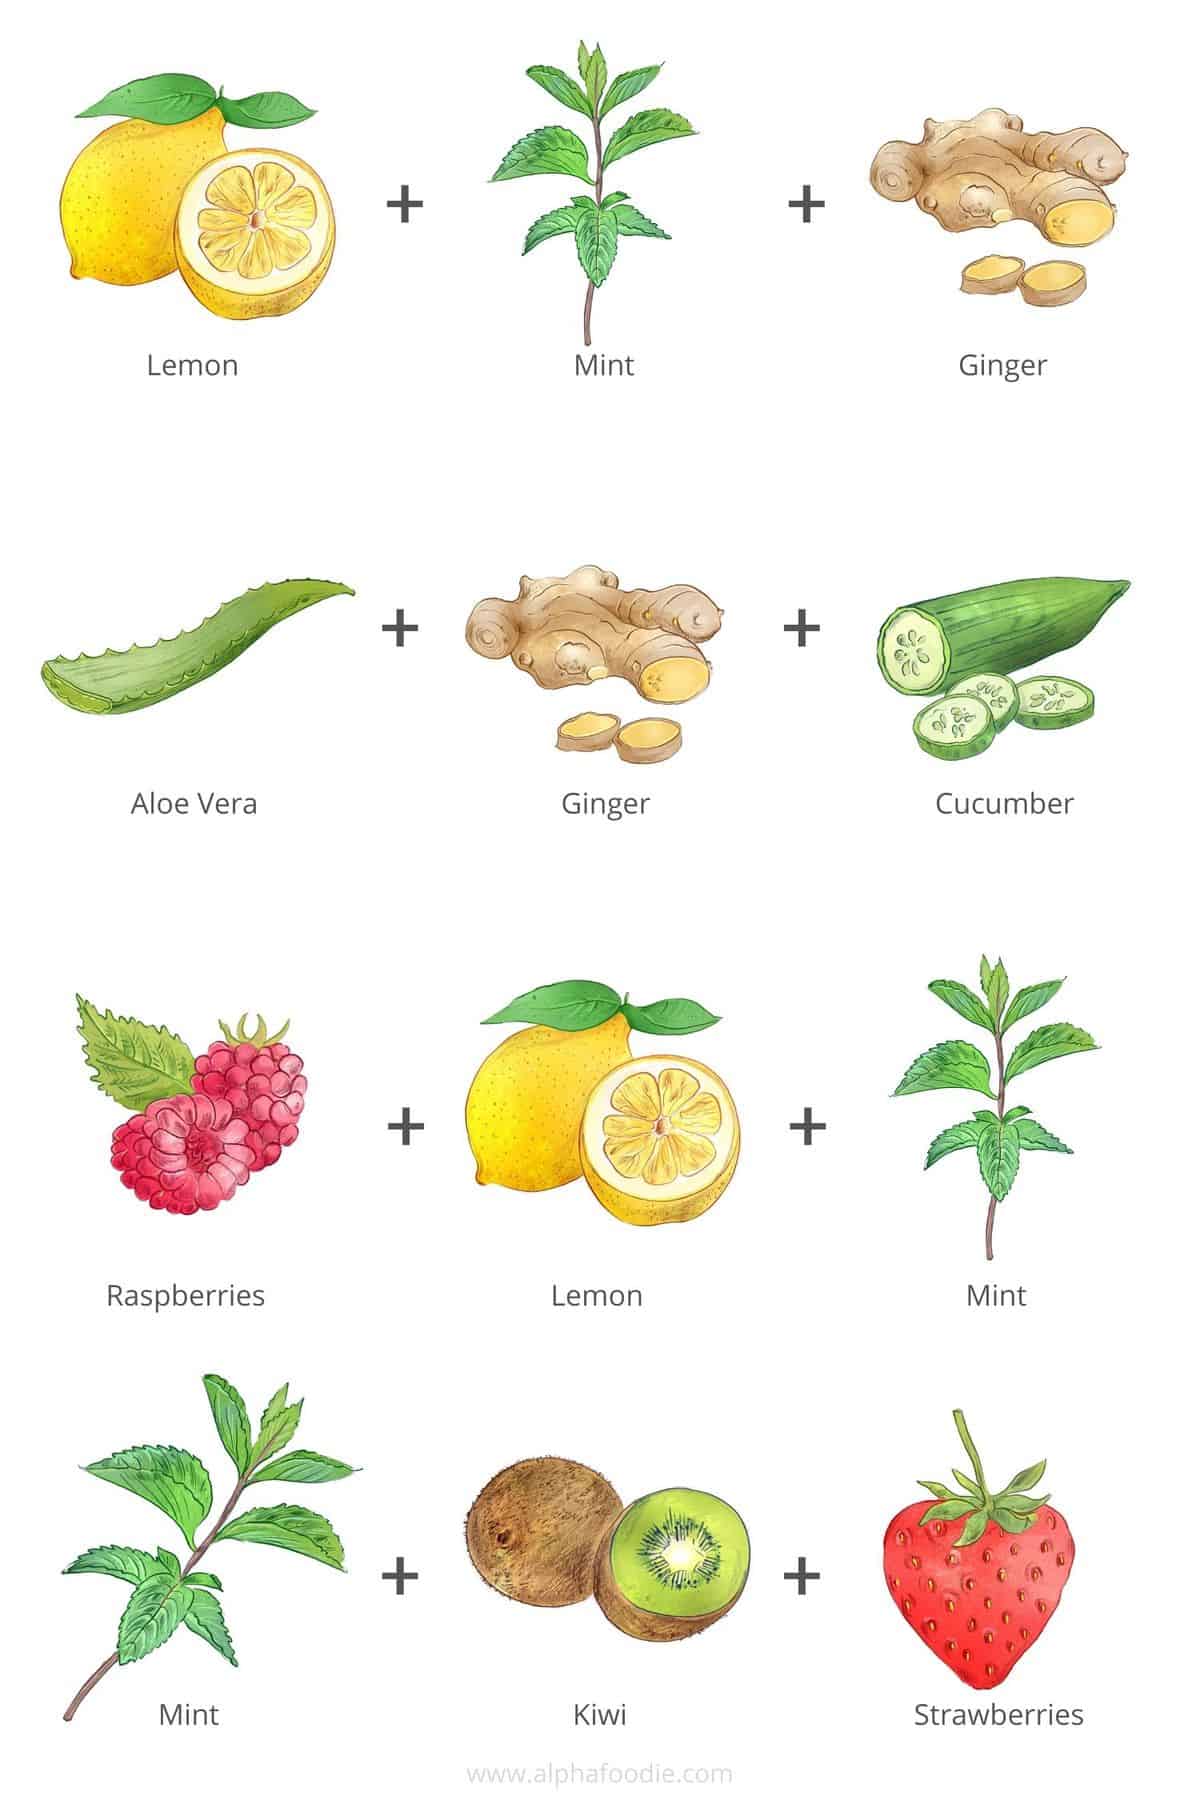 How to Make Cucumber Water and Other Flavored Waters